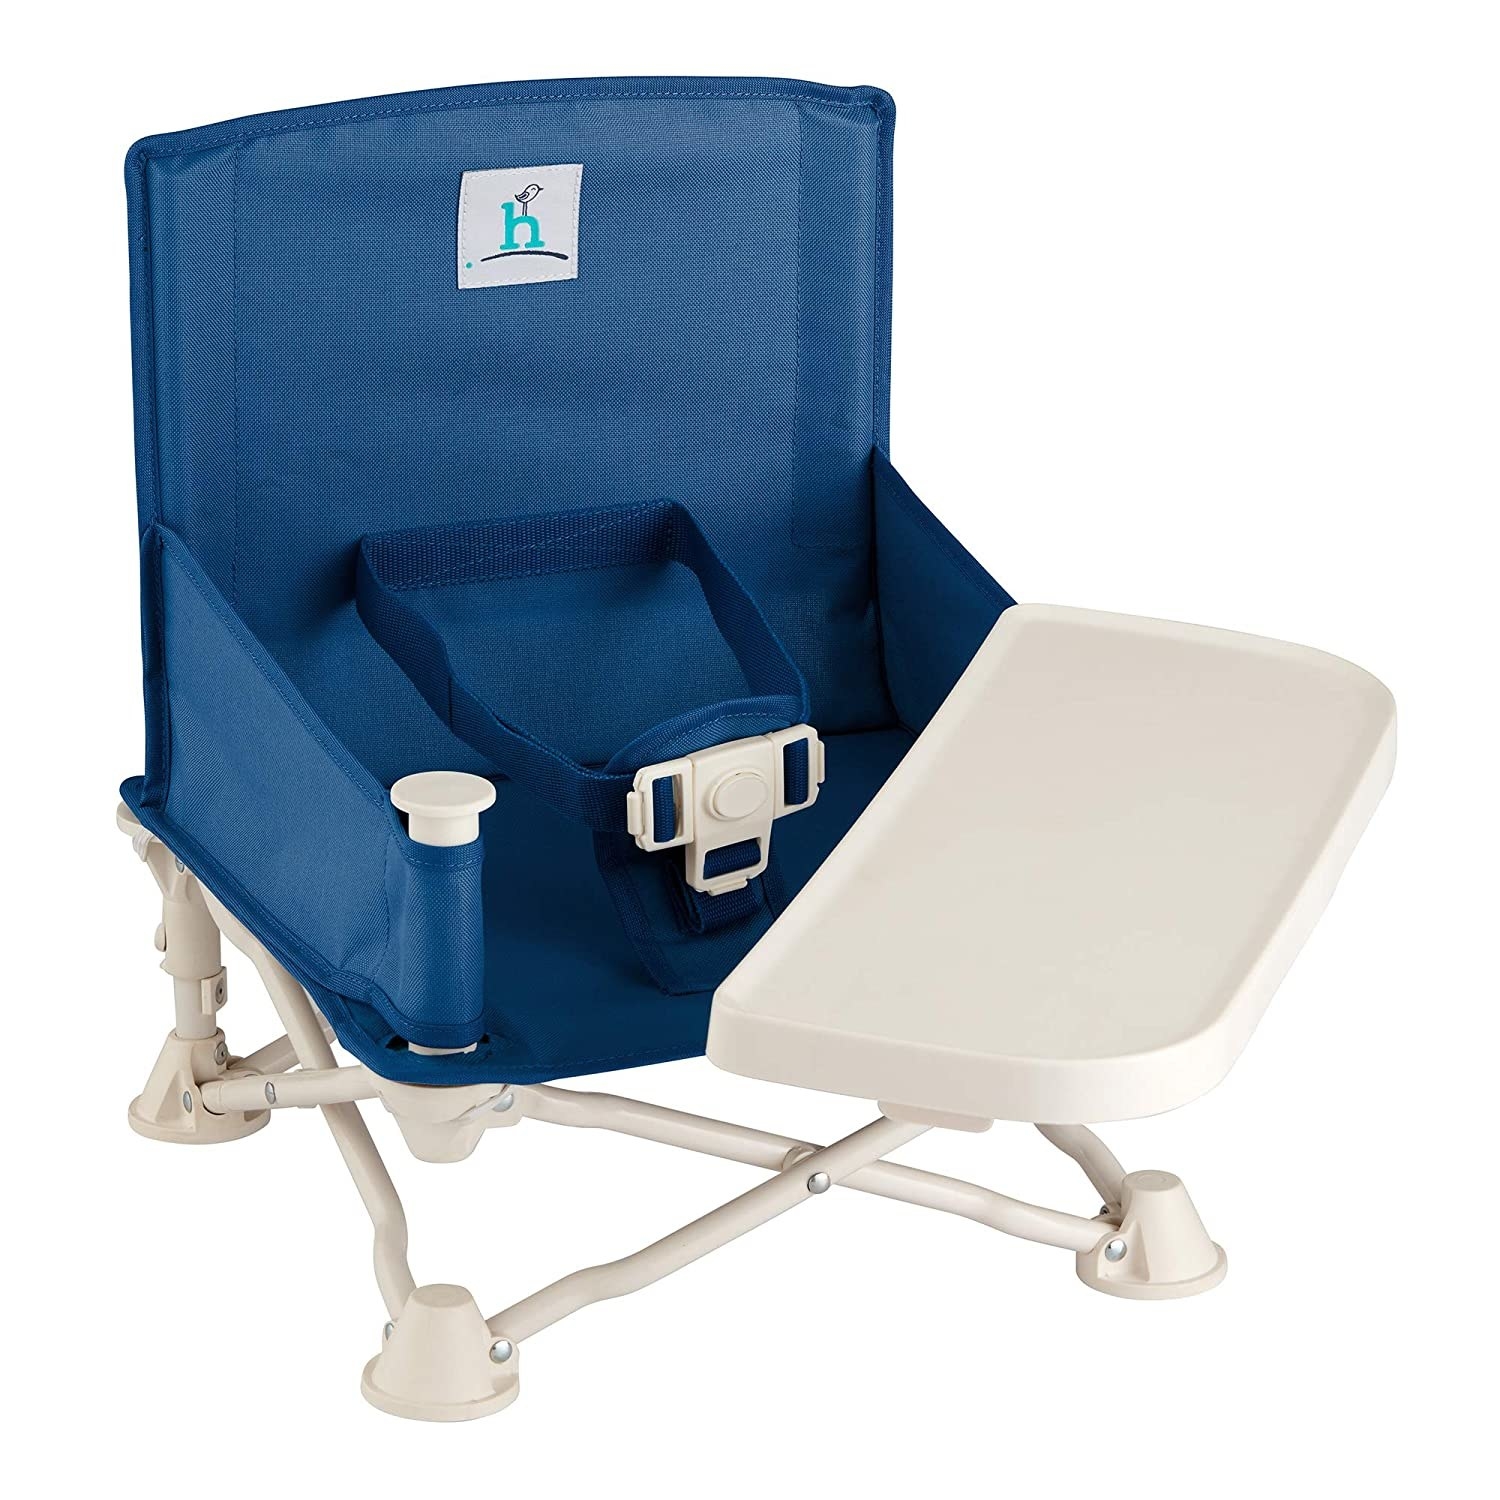 the booster seat in blue